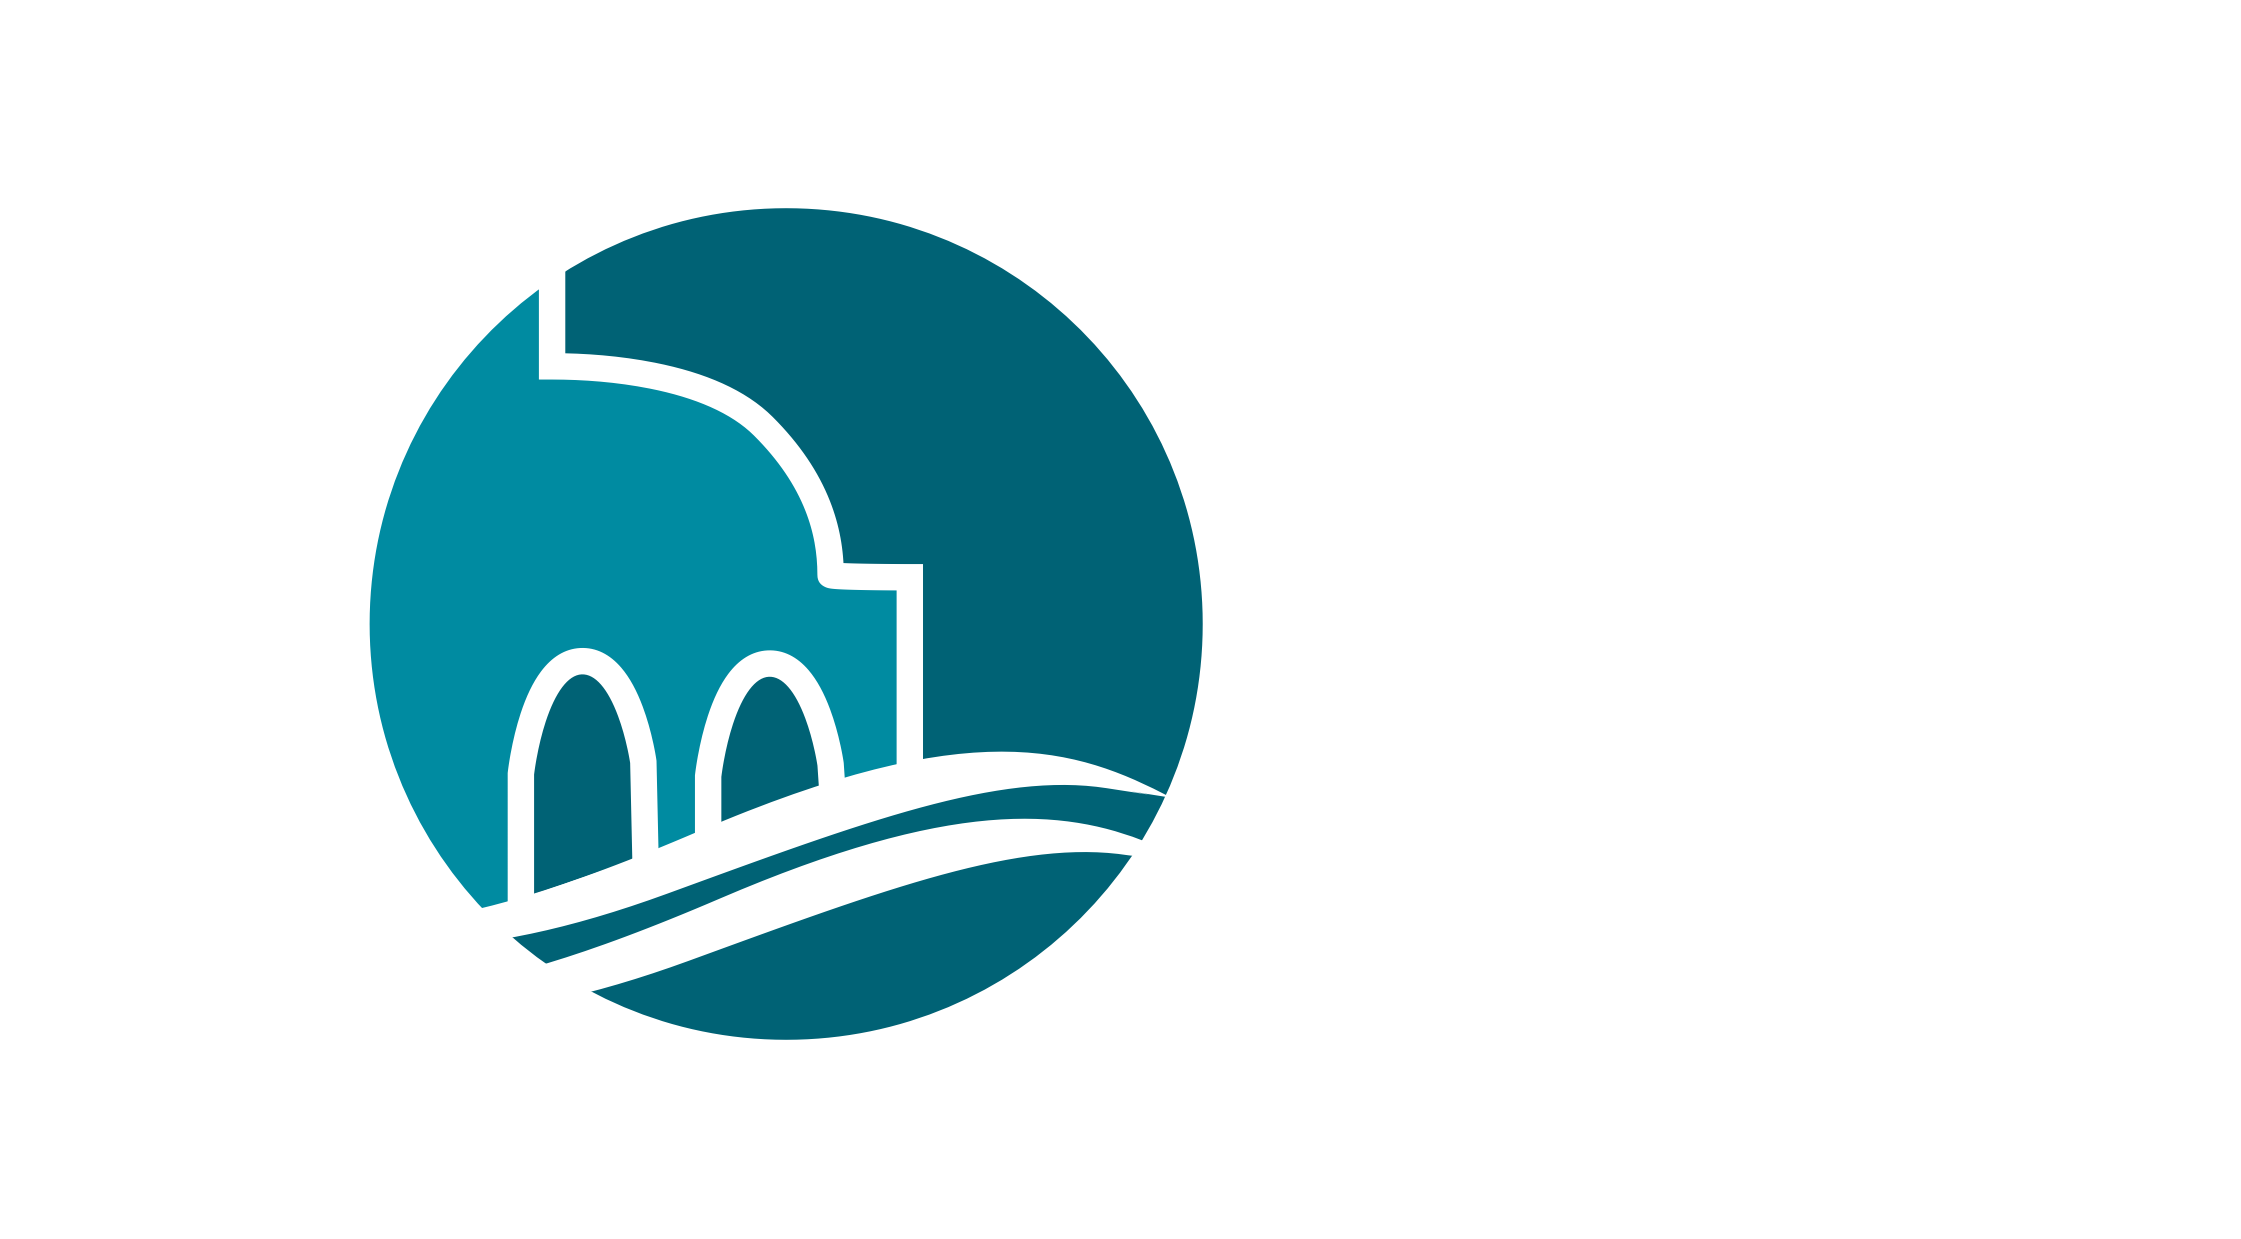 Buy Playa Real Estate Agency Helps Thousands Buy And Sell Property In Mexico